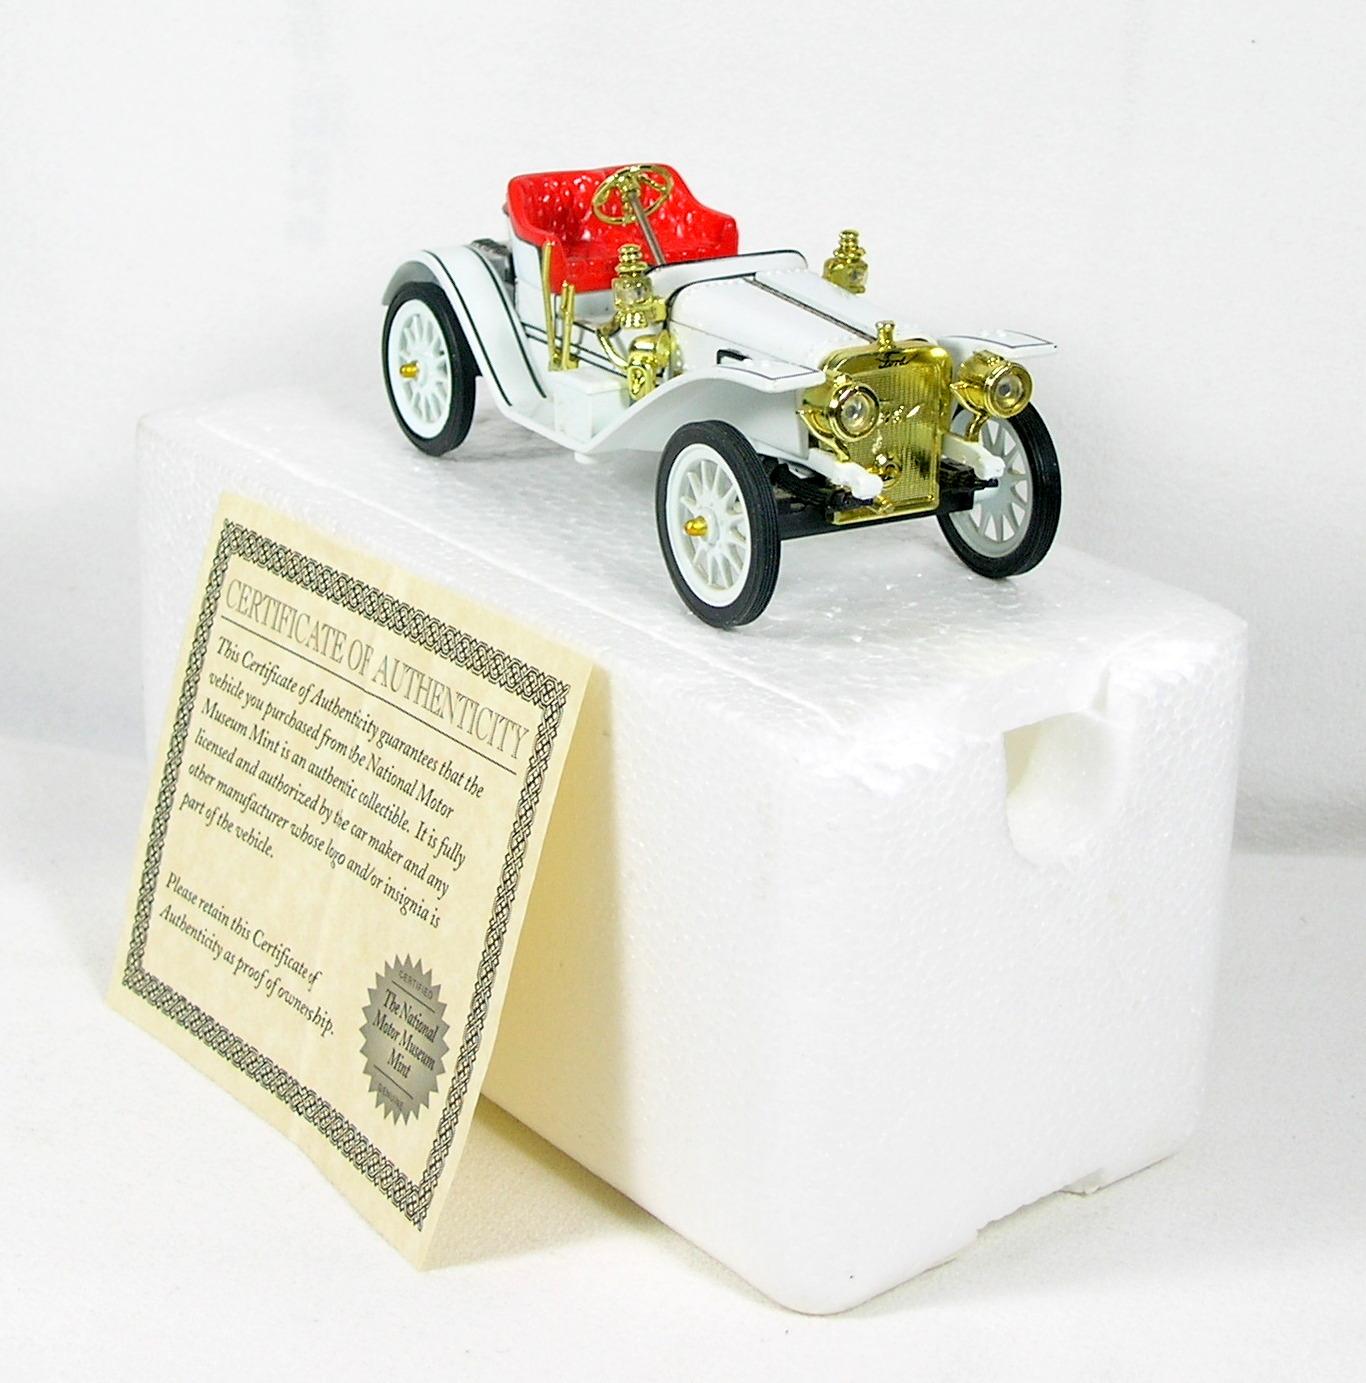 Diecast Replica of 1907 Ford Model K Roadster From National Motor Museum Mi